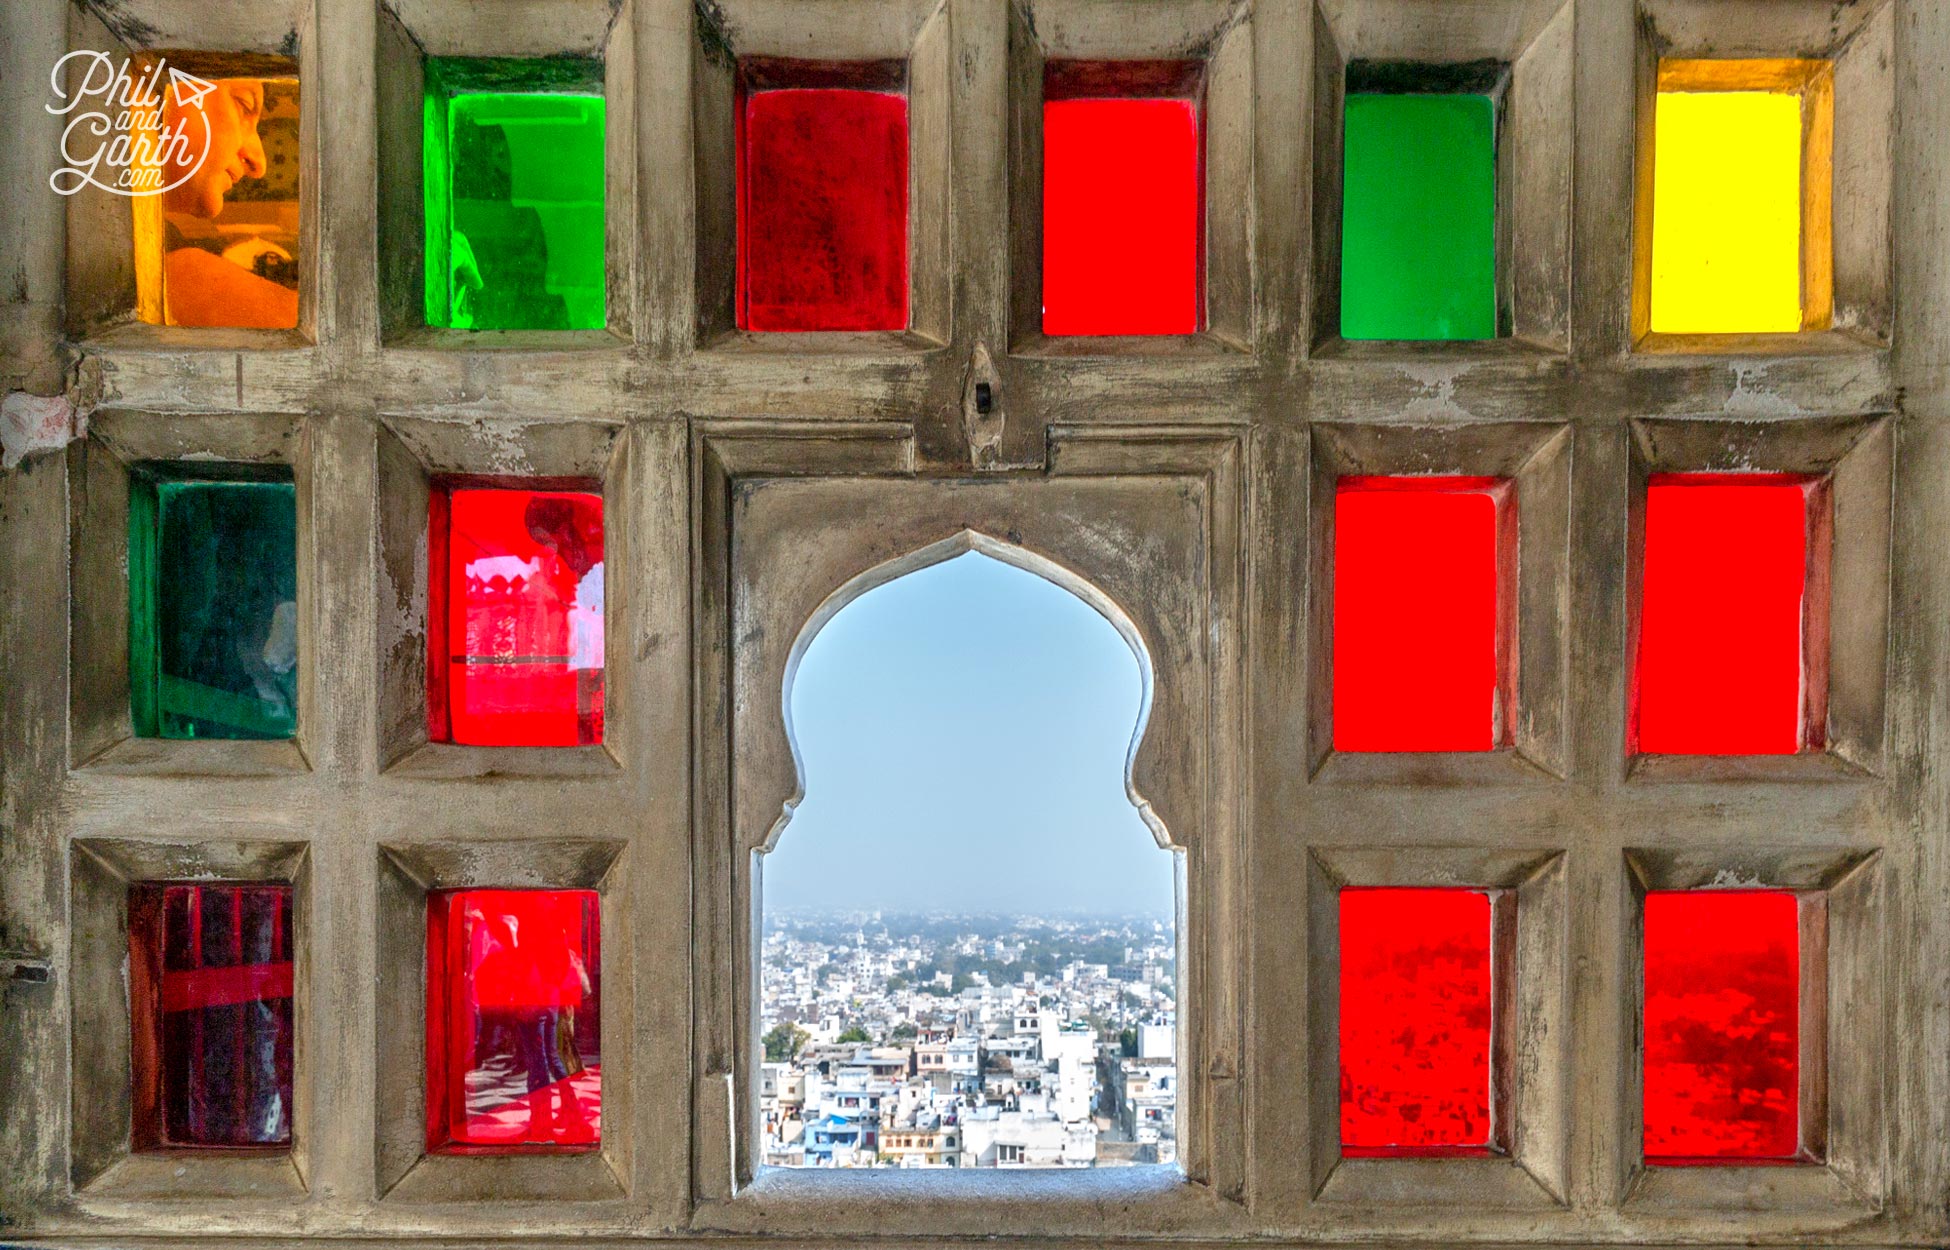 Our favourite window in Badi Charur Chowk looking out over Udaipur